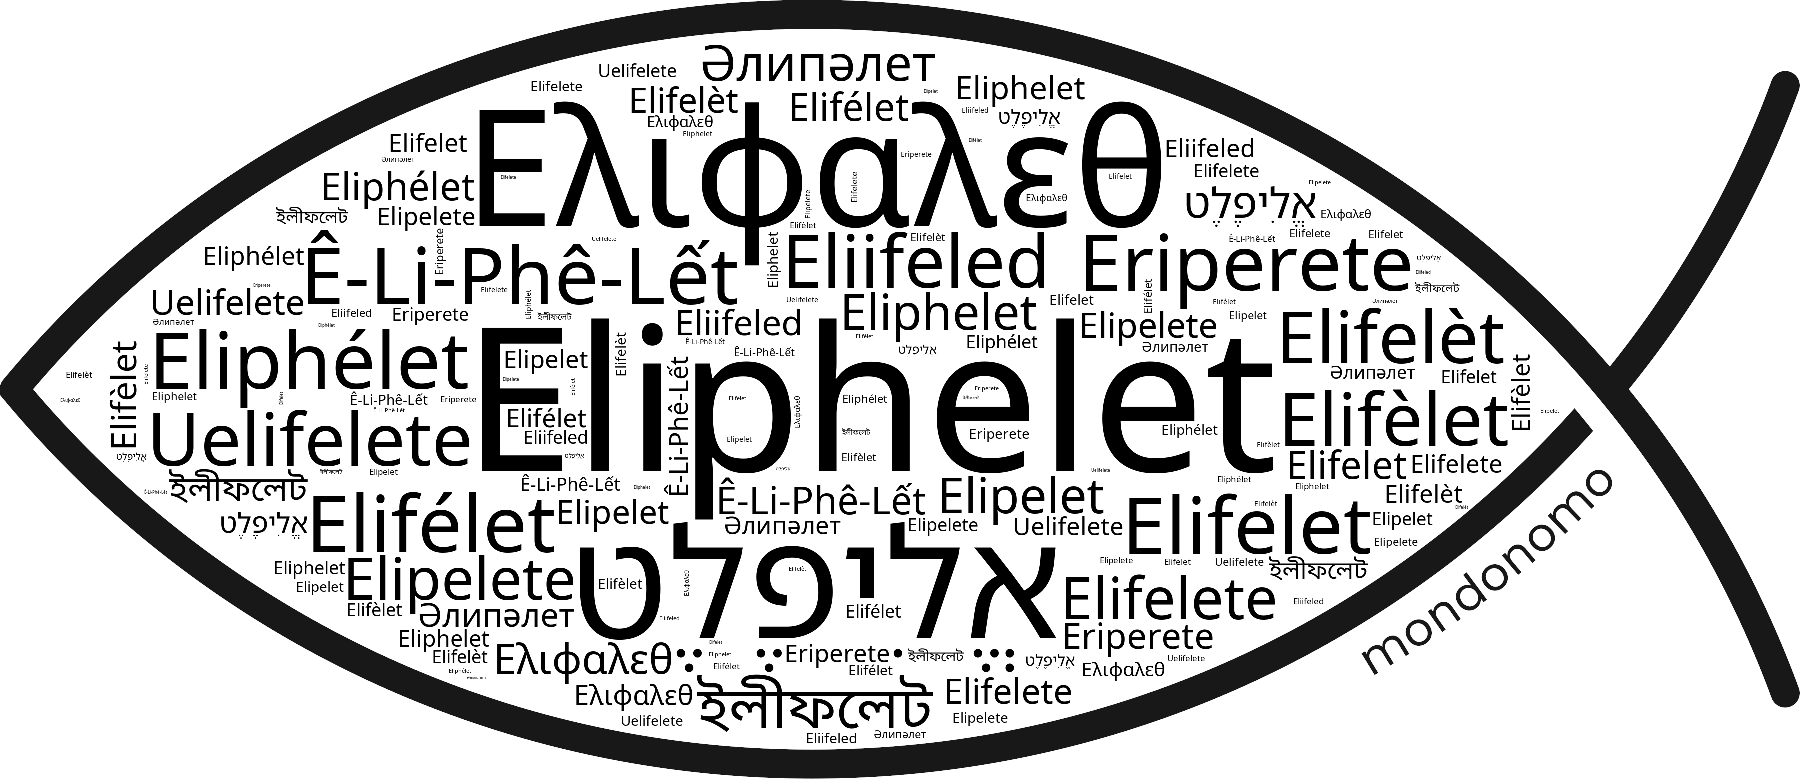 Name Eliphelet in the world's Bibles